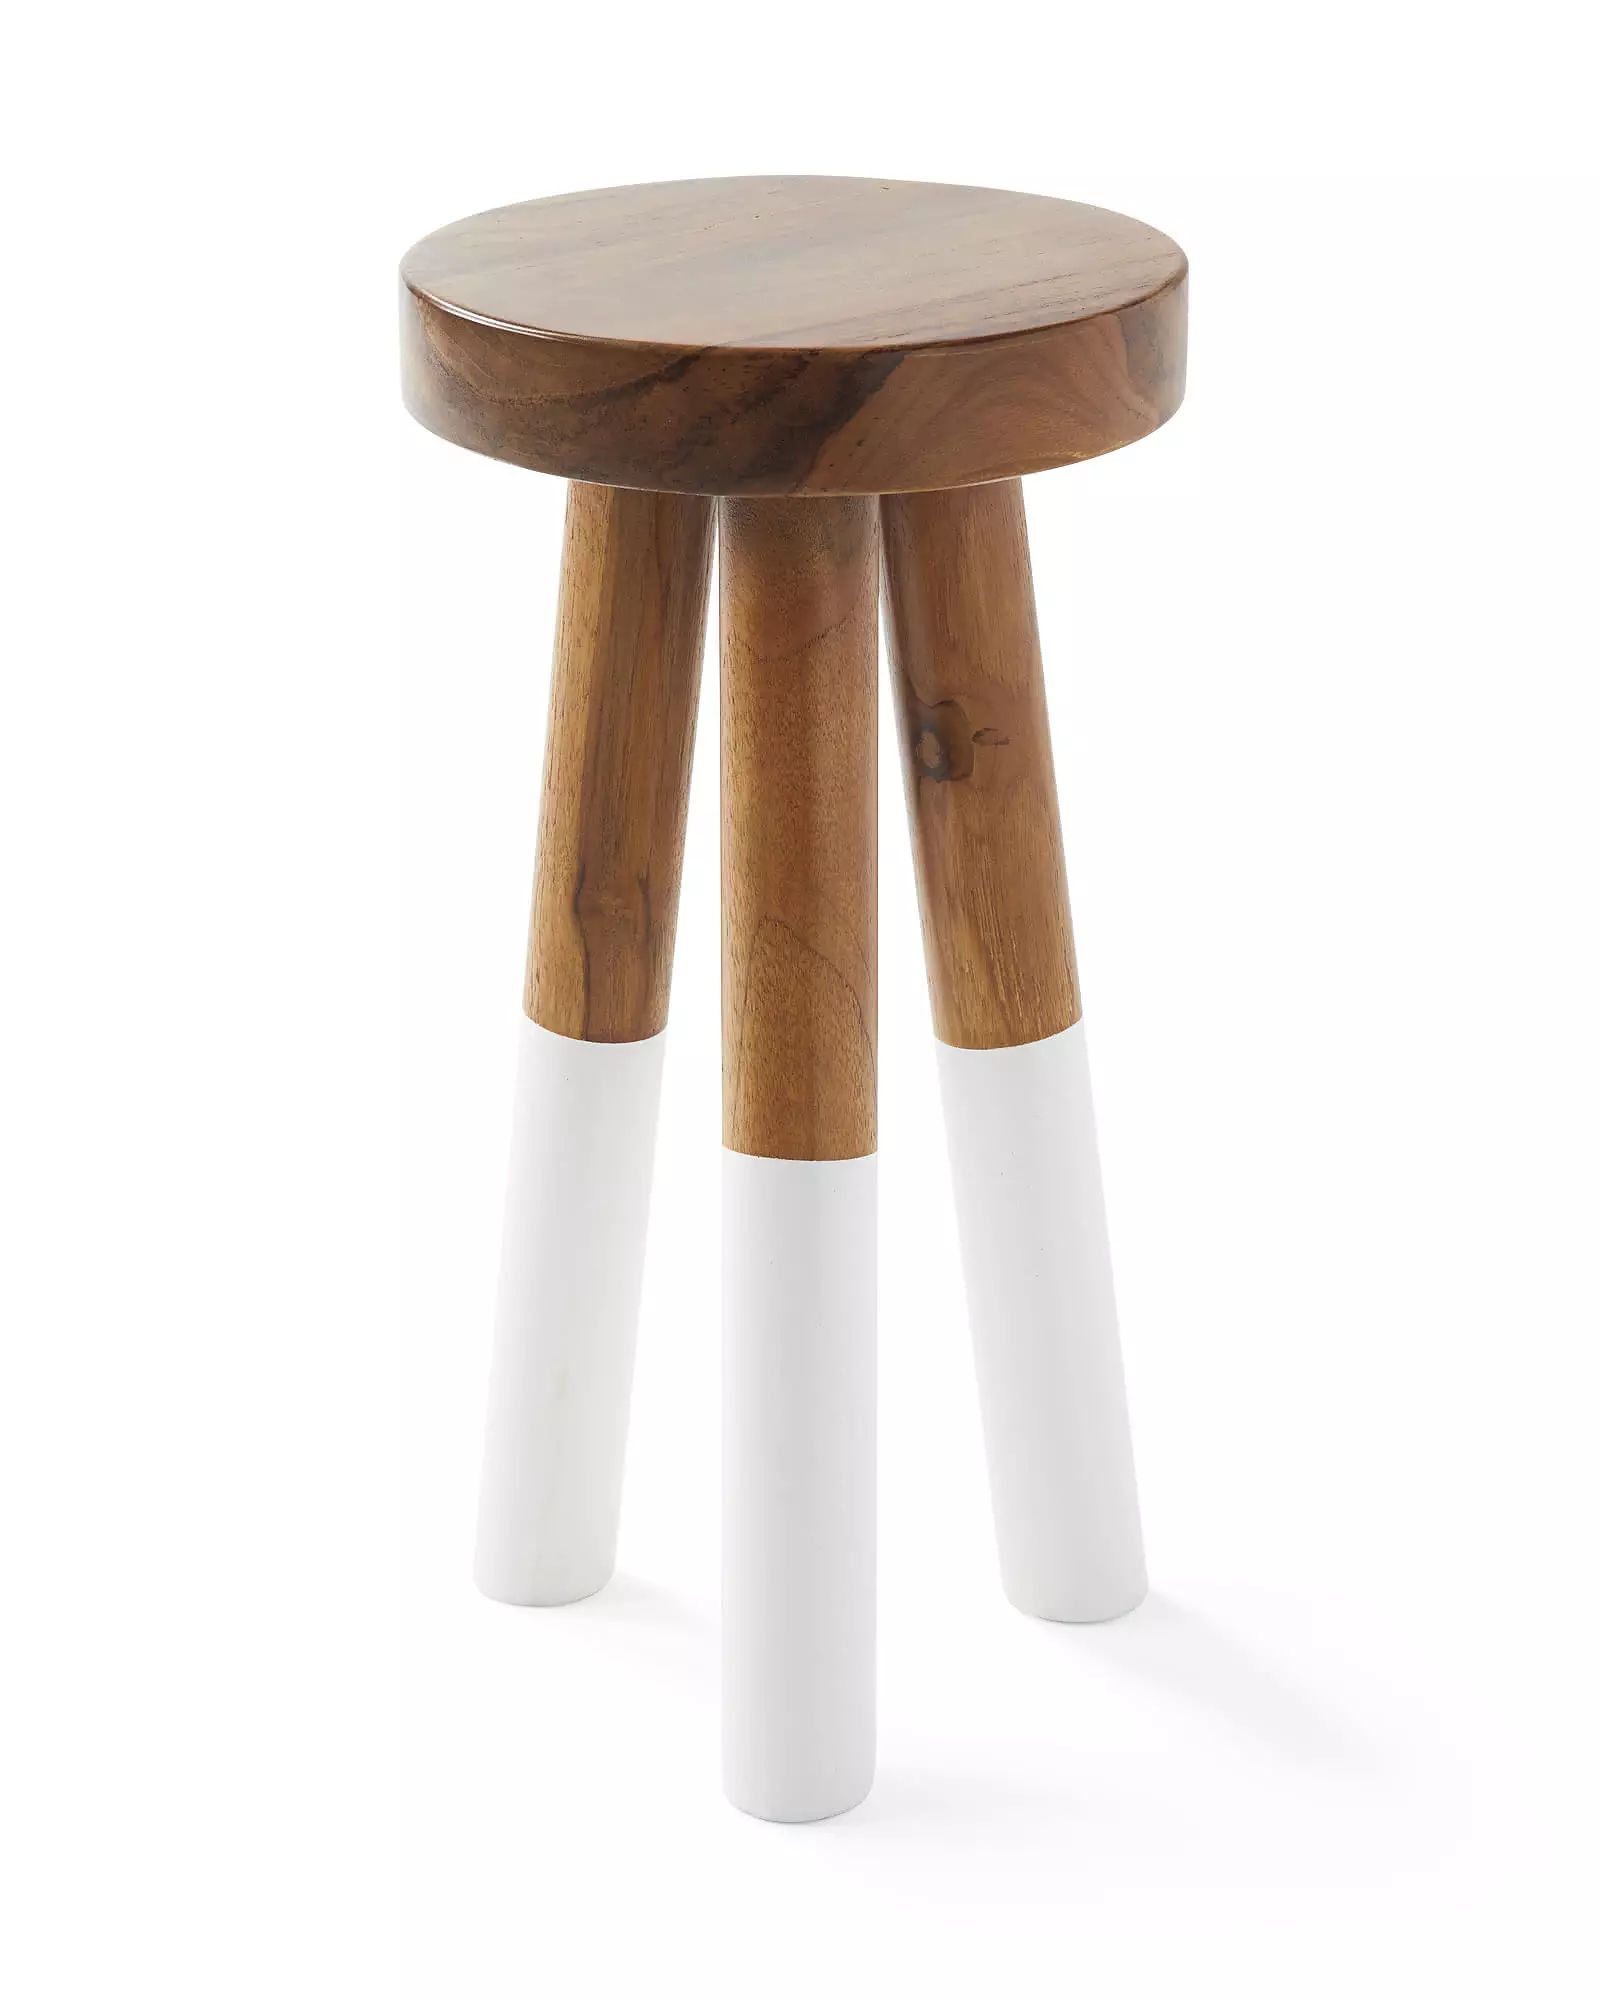 "I bought the large and small stools. Love them both. Using one as a plant stand in my sitting ar... | Serena and Lily